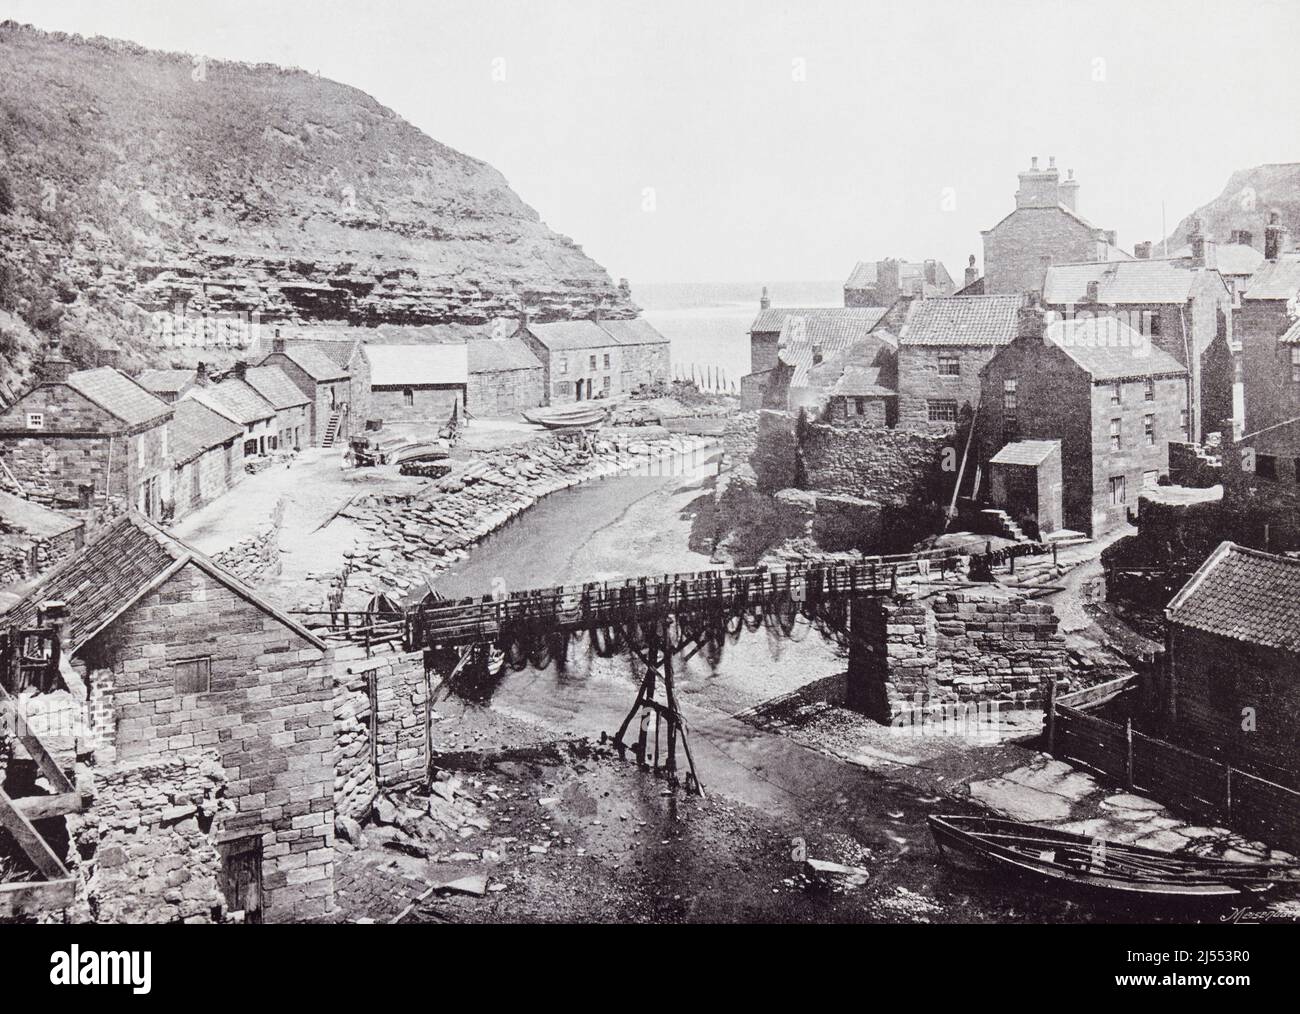 Staithes, Scarborough, North Yorkshire, England, seen here in the 19th century.  From Around The Coast,  An Album of Pictures from Photographs of the Chief Seaside Places of Interest in Great Britain and Ireland published London, 1895, by George Newnes Limited. Stock Photo